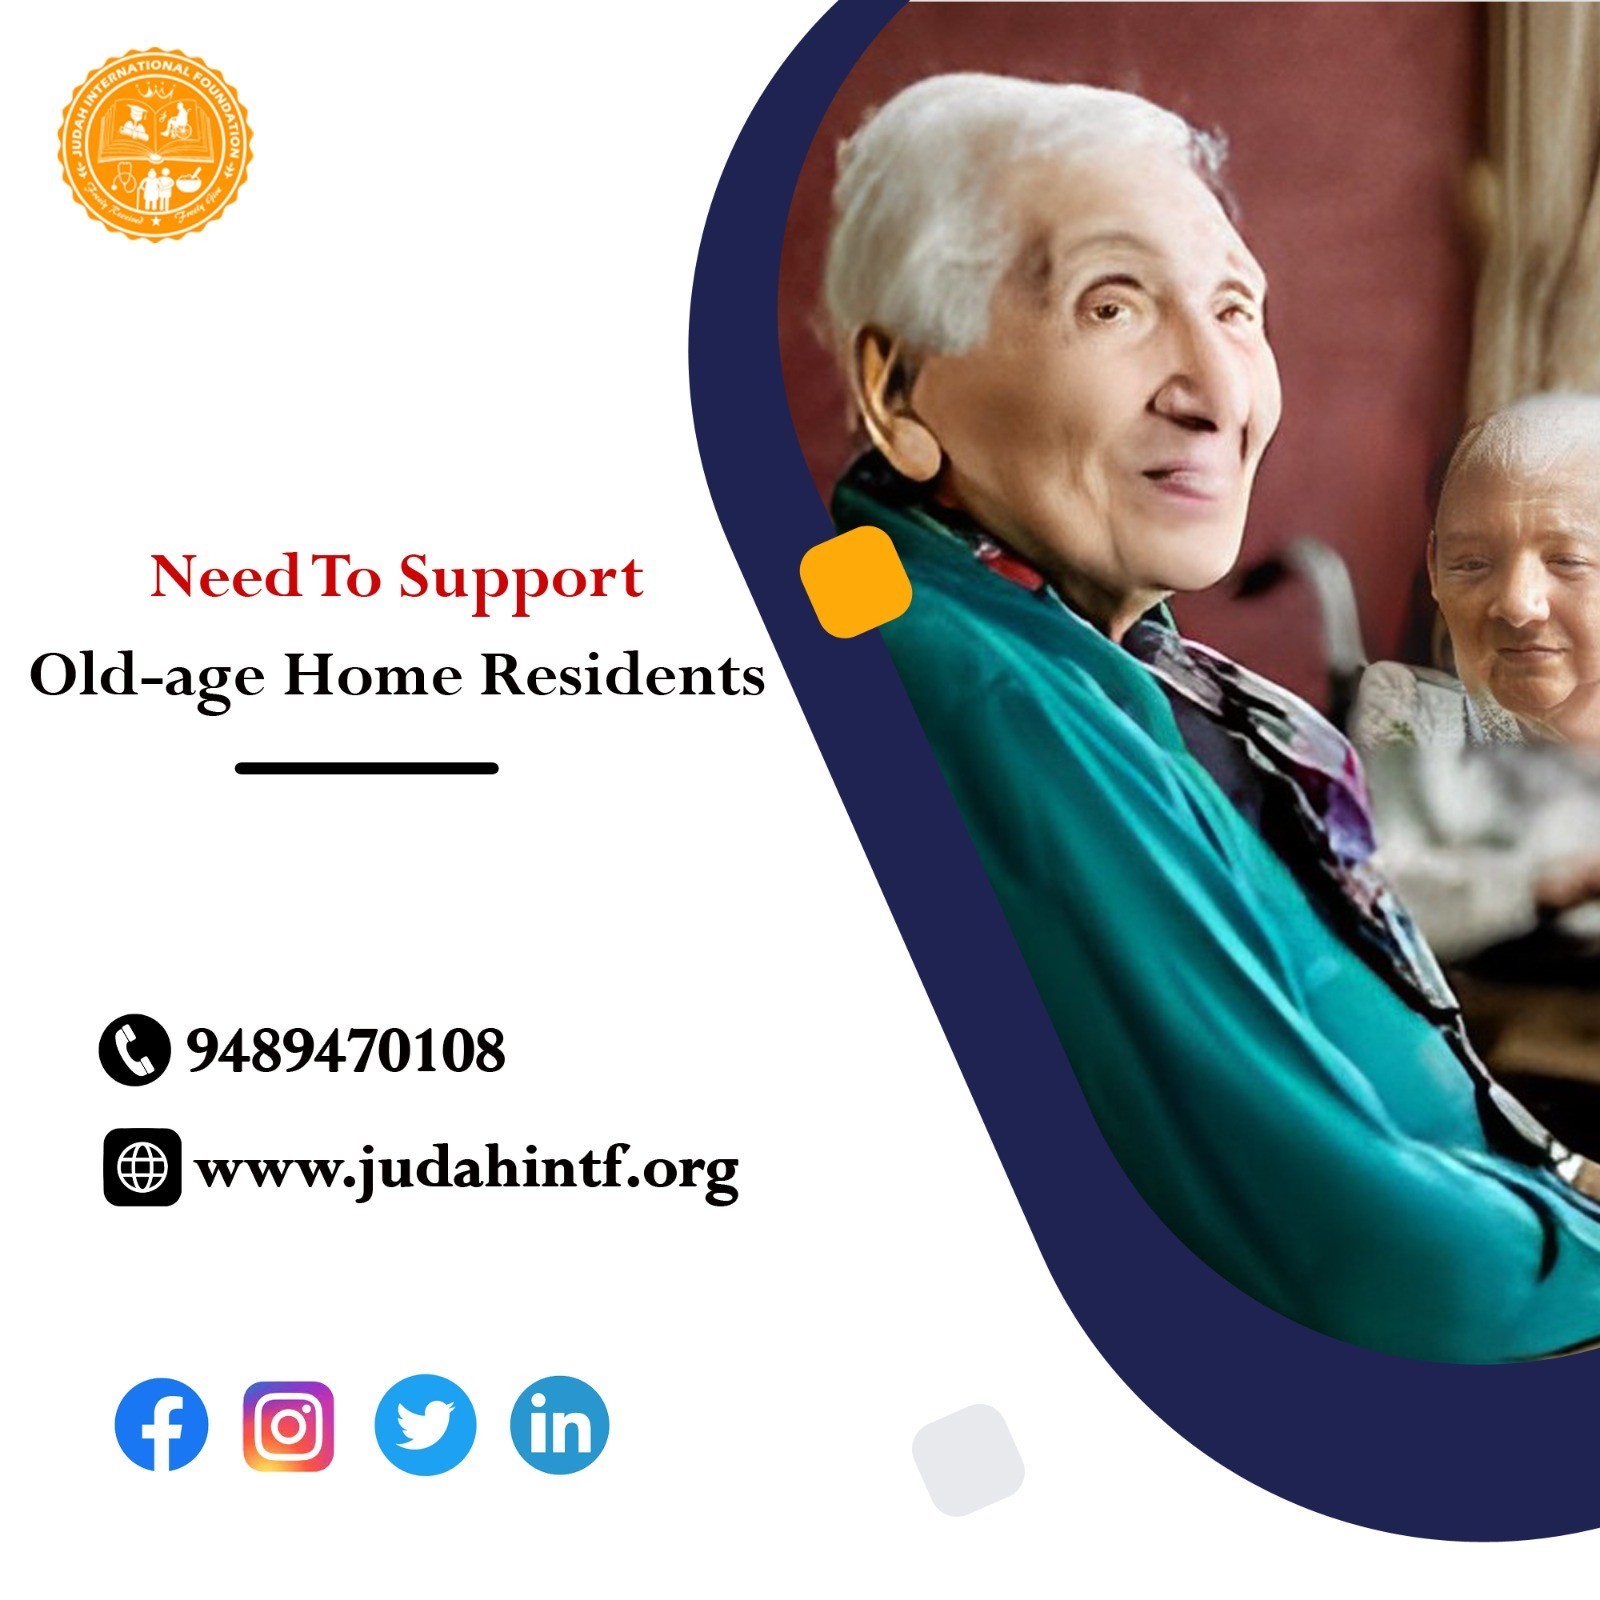 Need to Support Old-age Home Residents